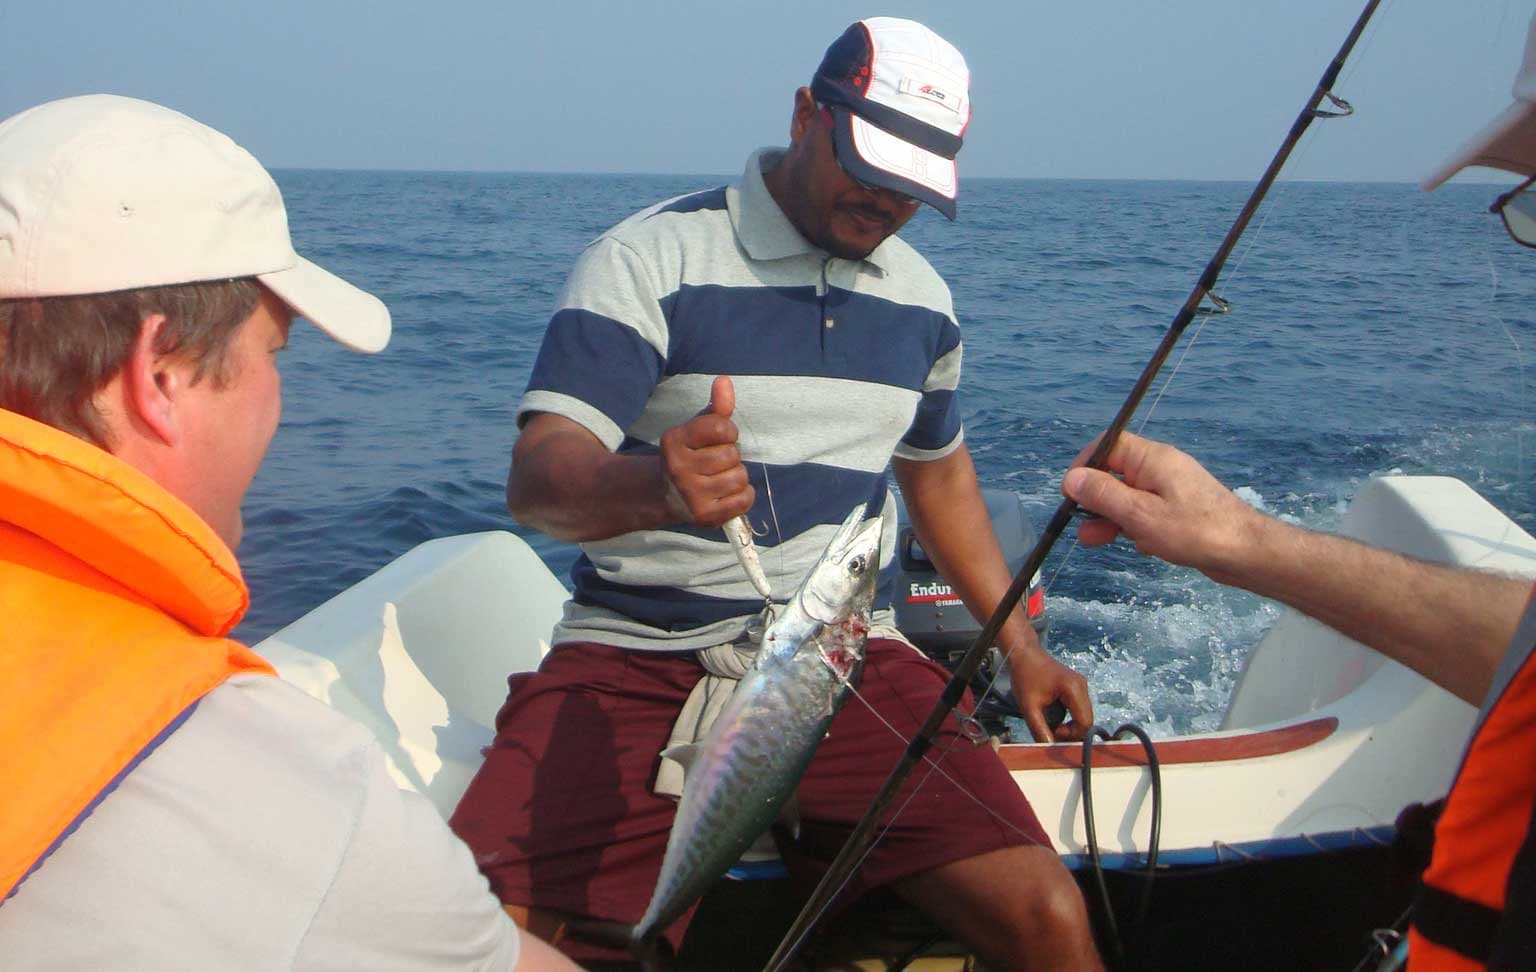 A well experienced guide showed how to catch fish in the Mirissa fishing tour